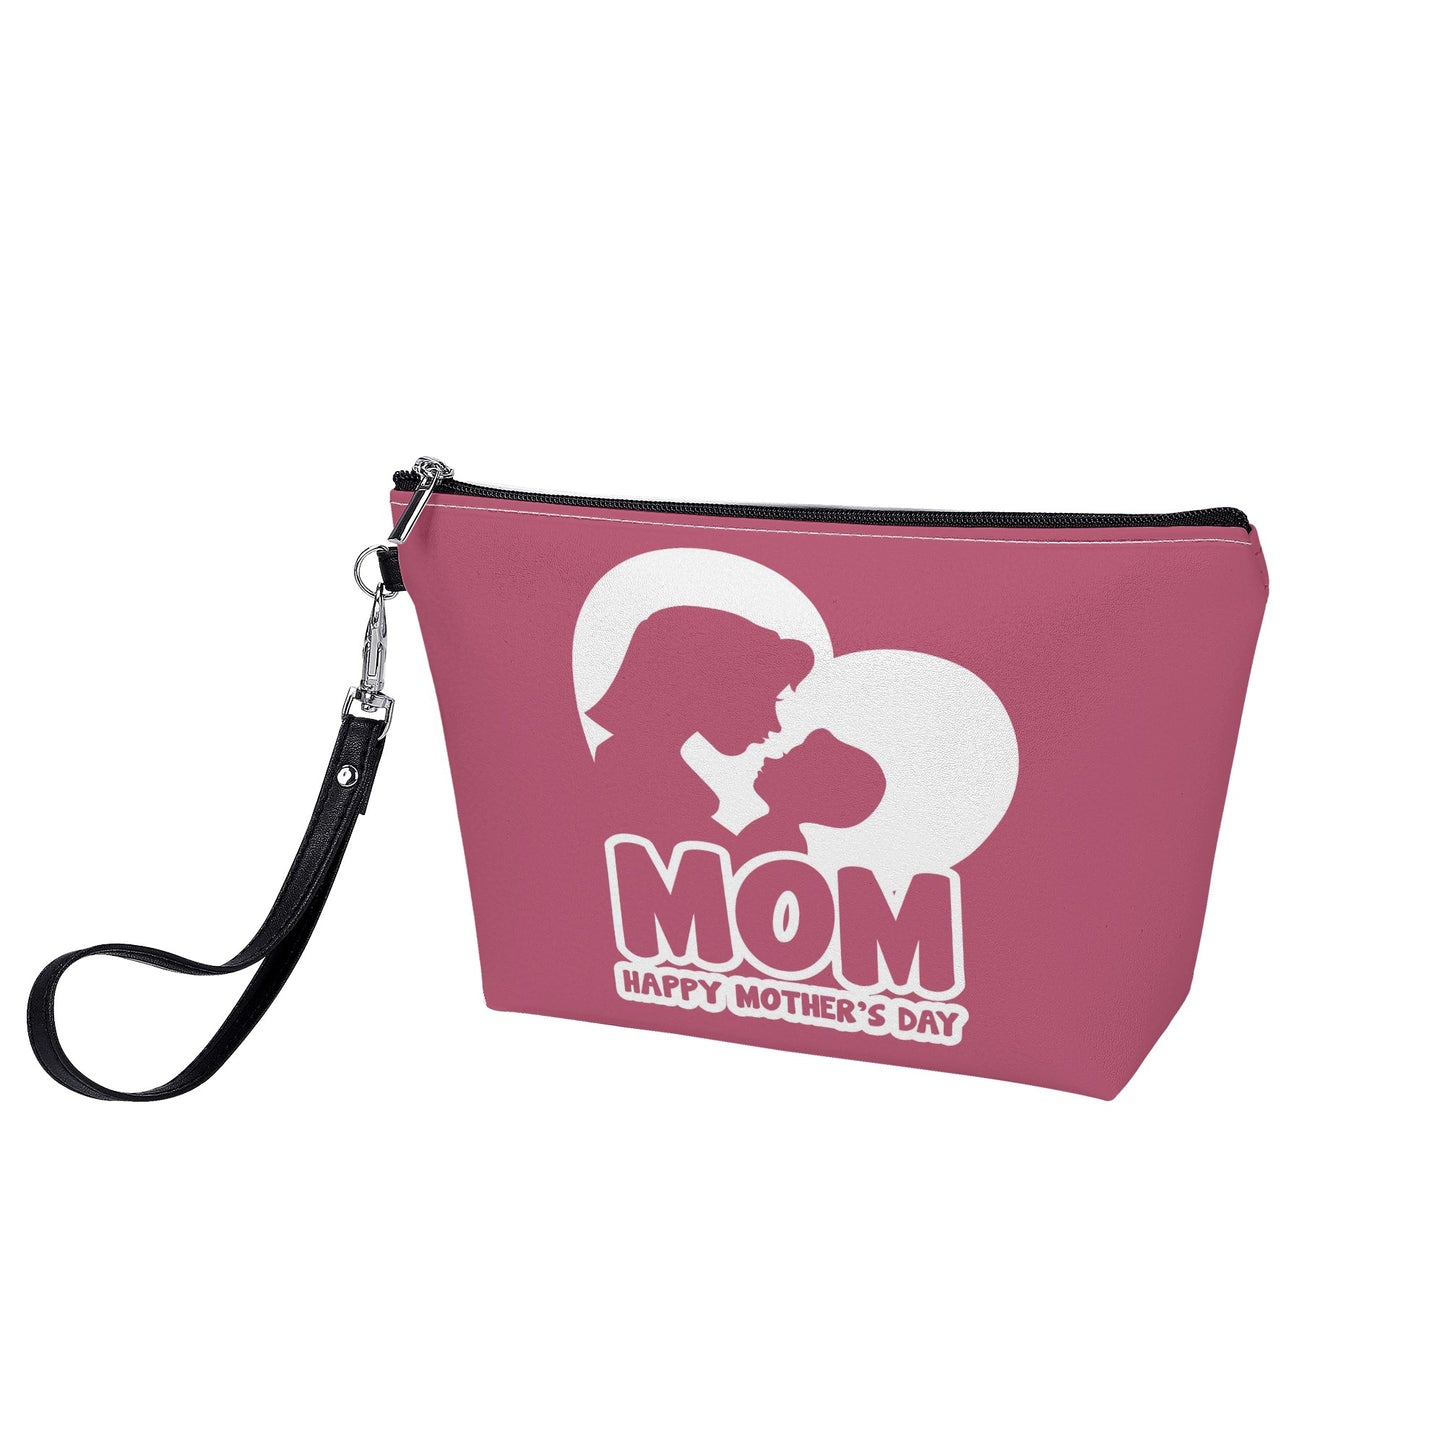 Mothers Need To Stay Organized with this Sling Cosmetic Bag